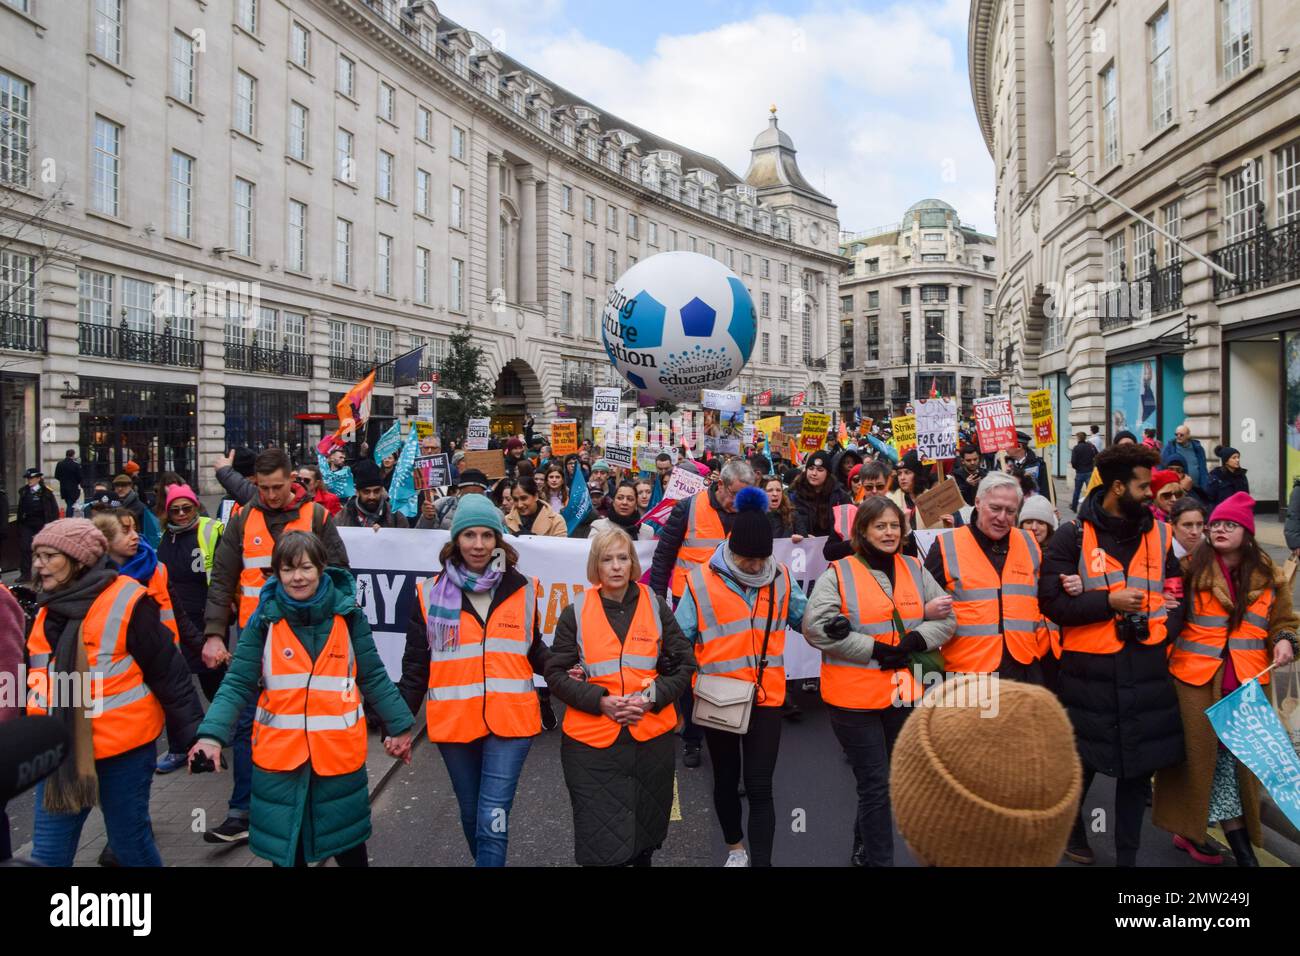 London, UK. 1st February 2023. Protesters in Regent Street. Thousands of teachers and supporters marched in central London as teachers across the country begin their strike over pay. The day has seen around half a million people staging walkouts around the UK, including teachers, university staff, public service workers and train drivers. Credit: Vuk Valcic/Alamy Live News. Stock Photo